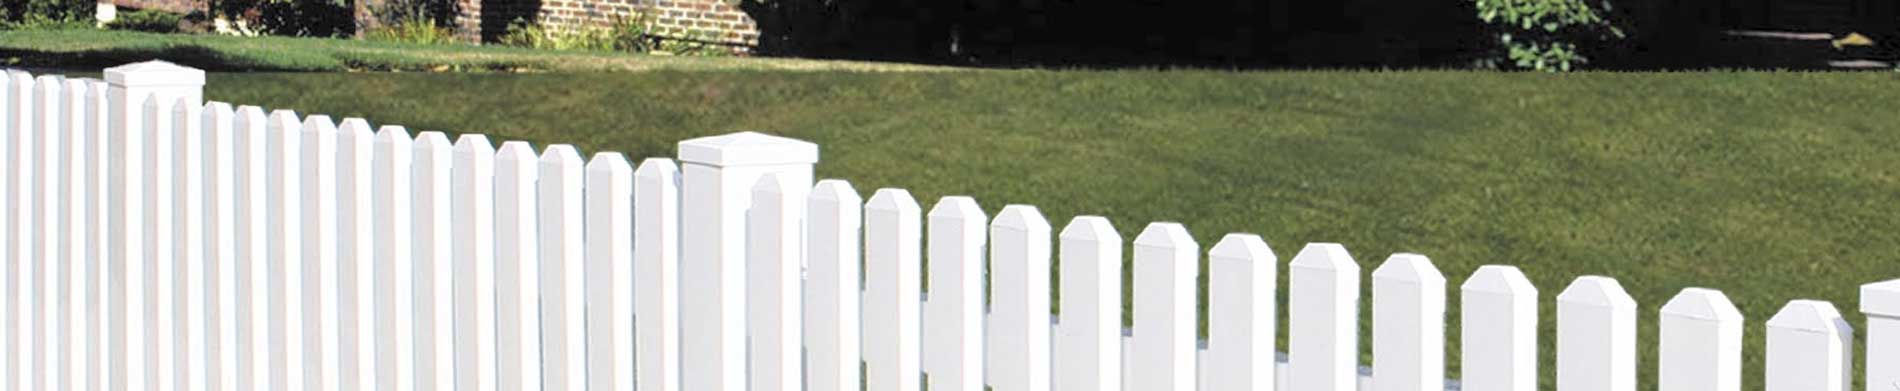 Colorful and low-maintenance fences that are beautiful yet so traditional – Shop online at Duramax